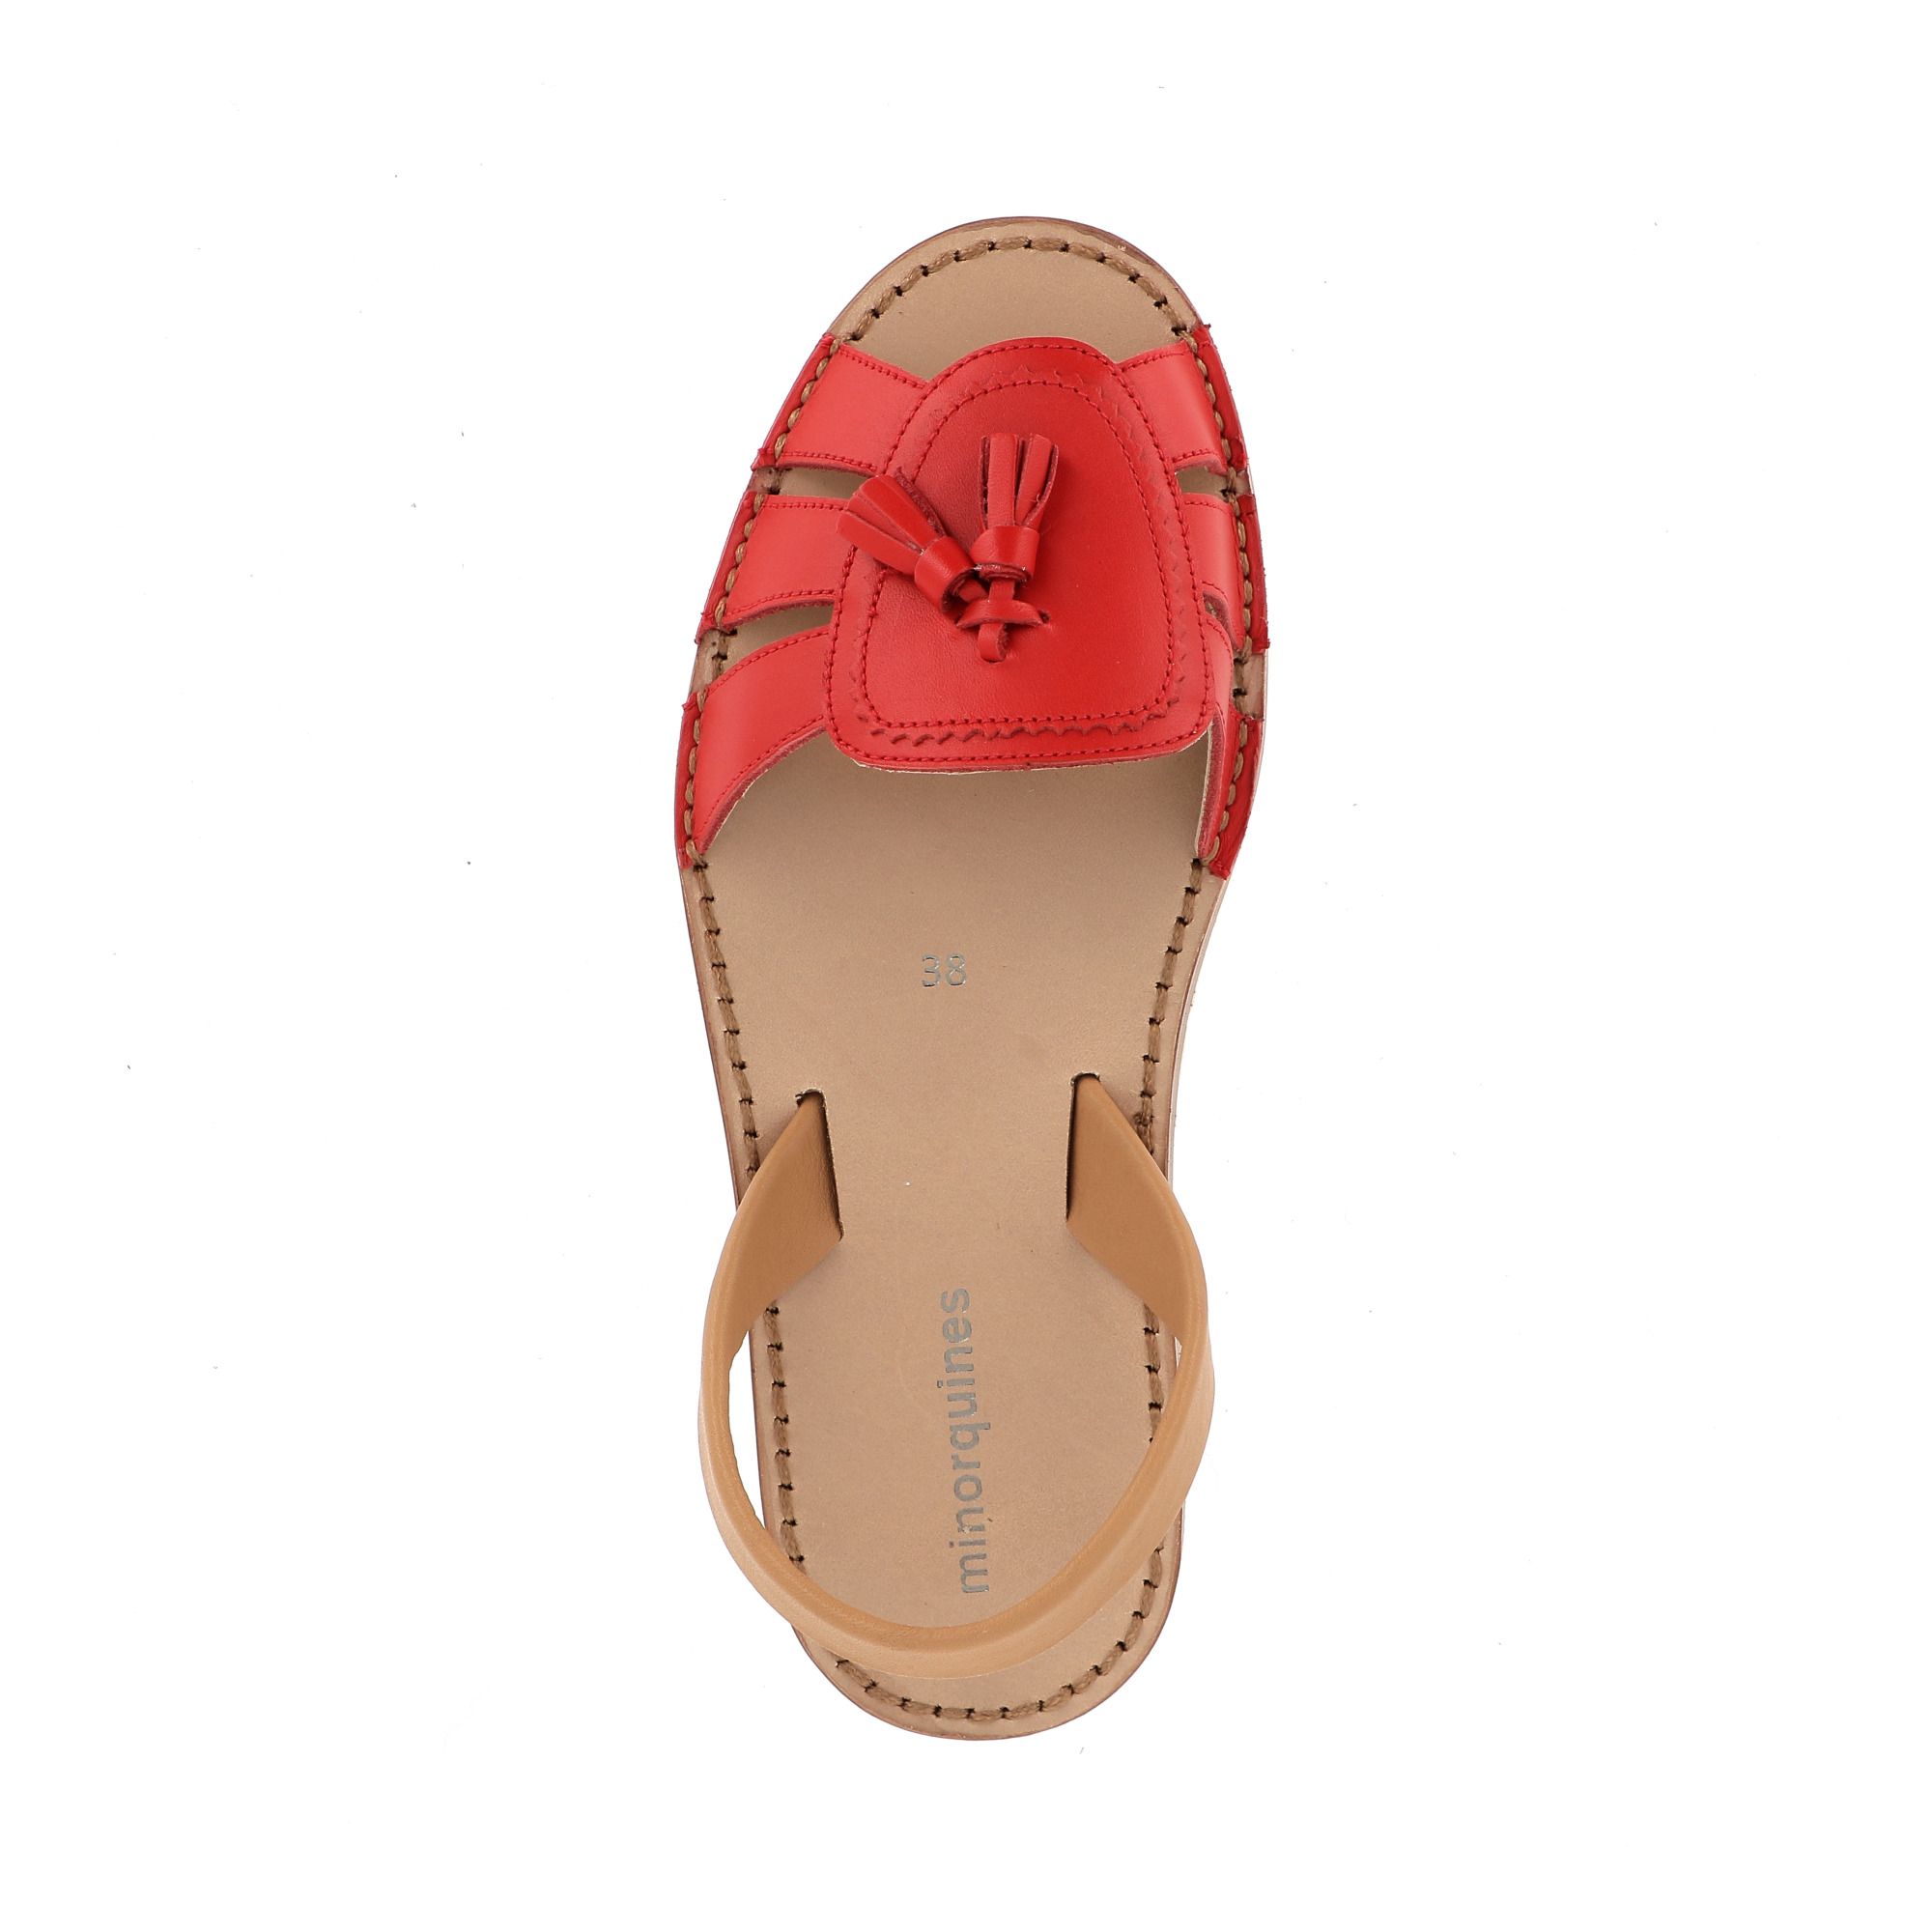 Minorquines - Sandales Avarca Neo 2 Cuir - Collection Adulte - Femme - Rouge